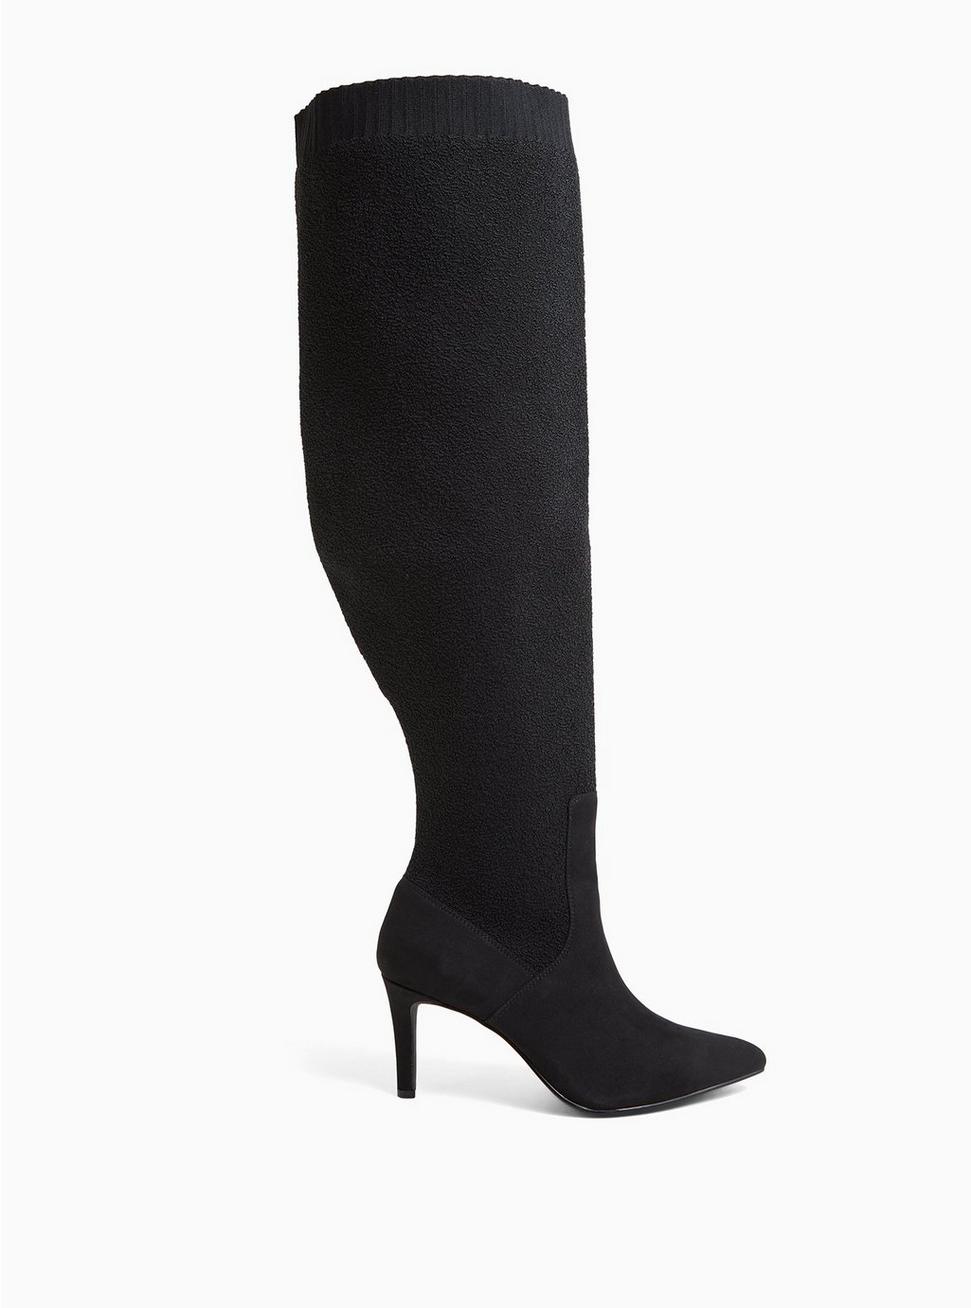 Plus Size - Black Stretch Over-The-Knee Boot (WW) - Torrid